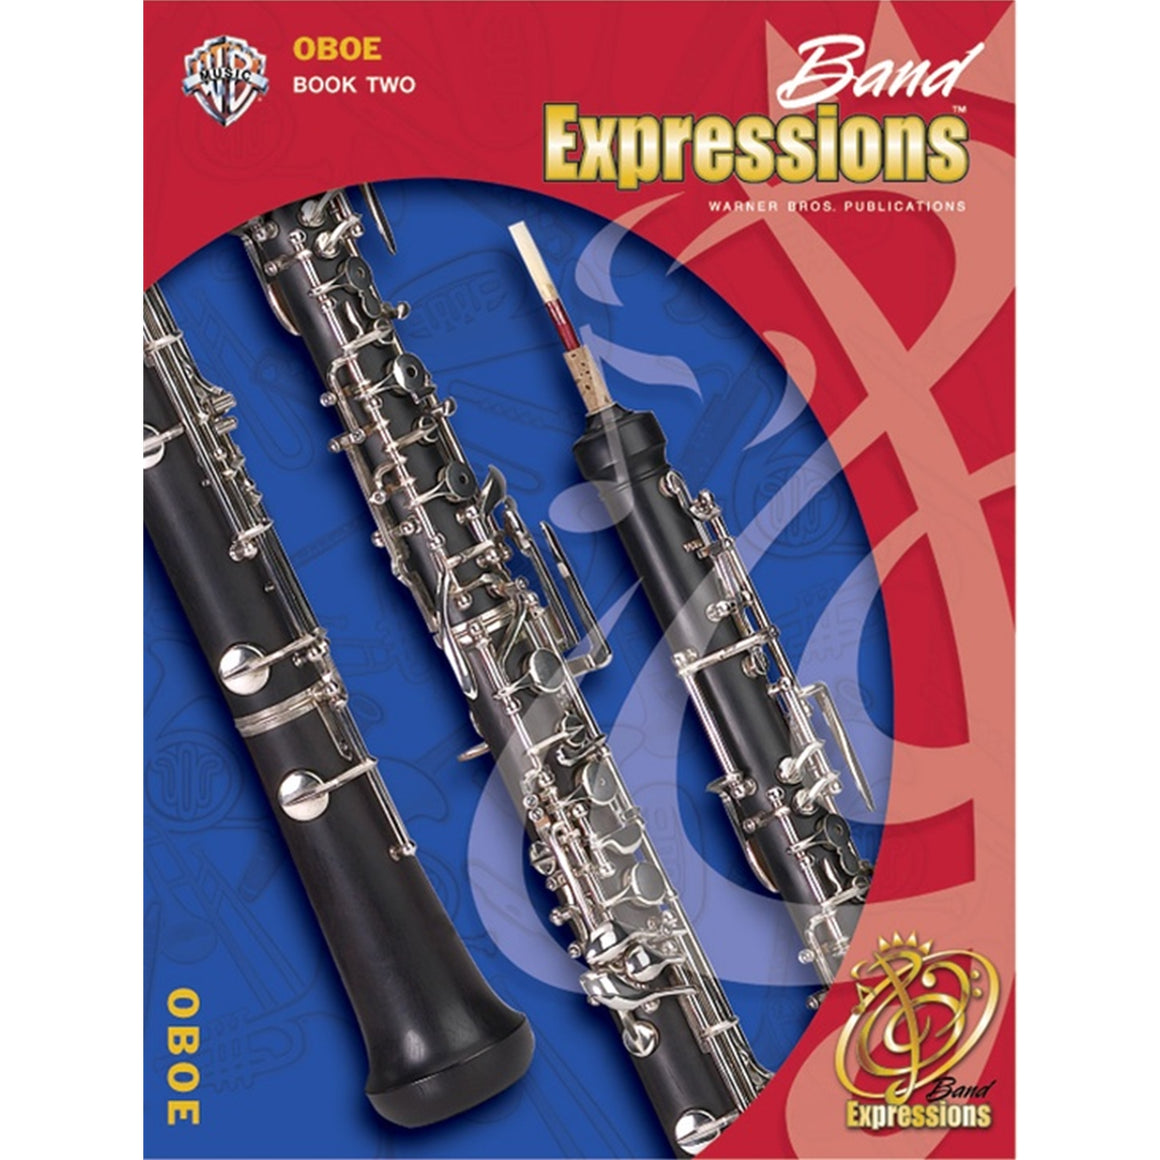 ALFRED 00-EMCB2003CD Band Expressions , Book Two: Student Edition [Oboe]